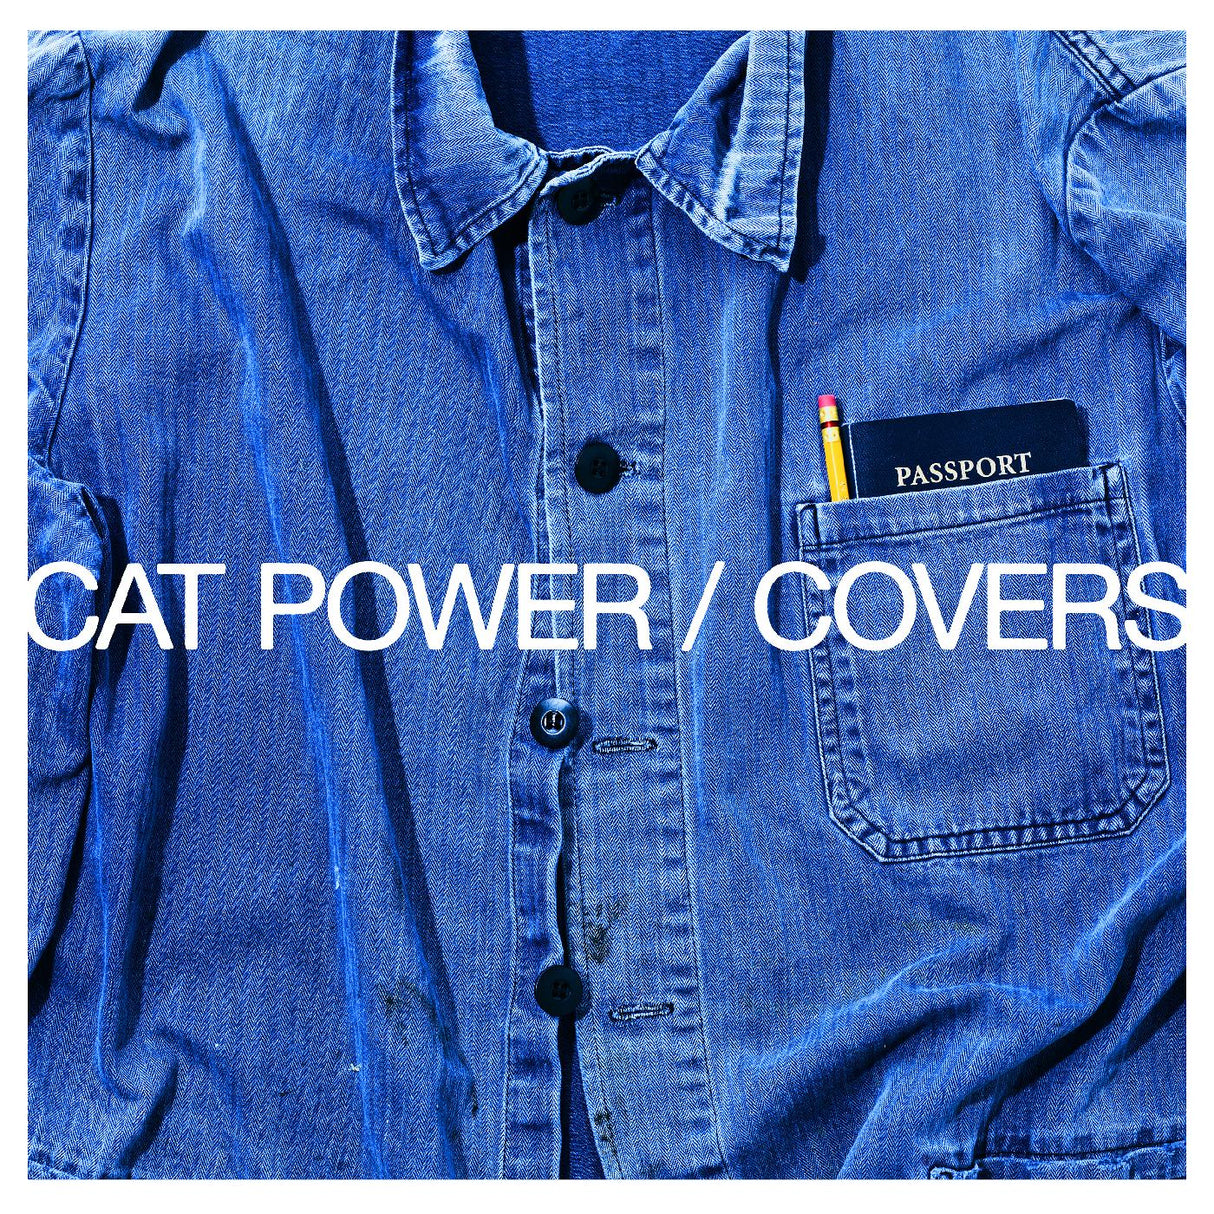 Covers [CD]